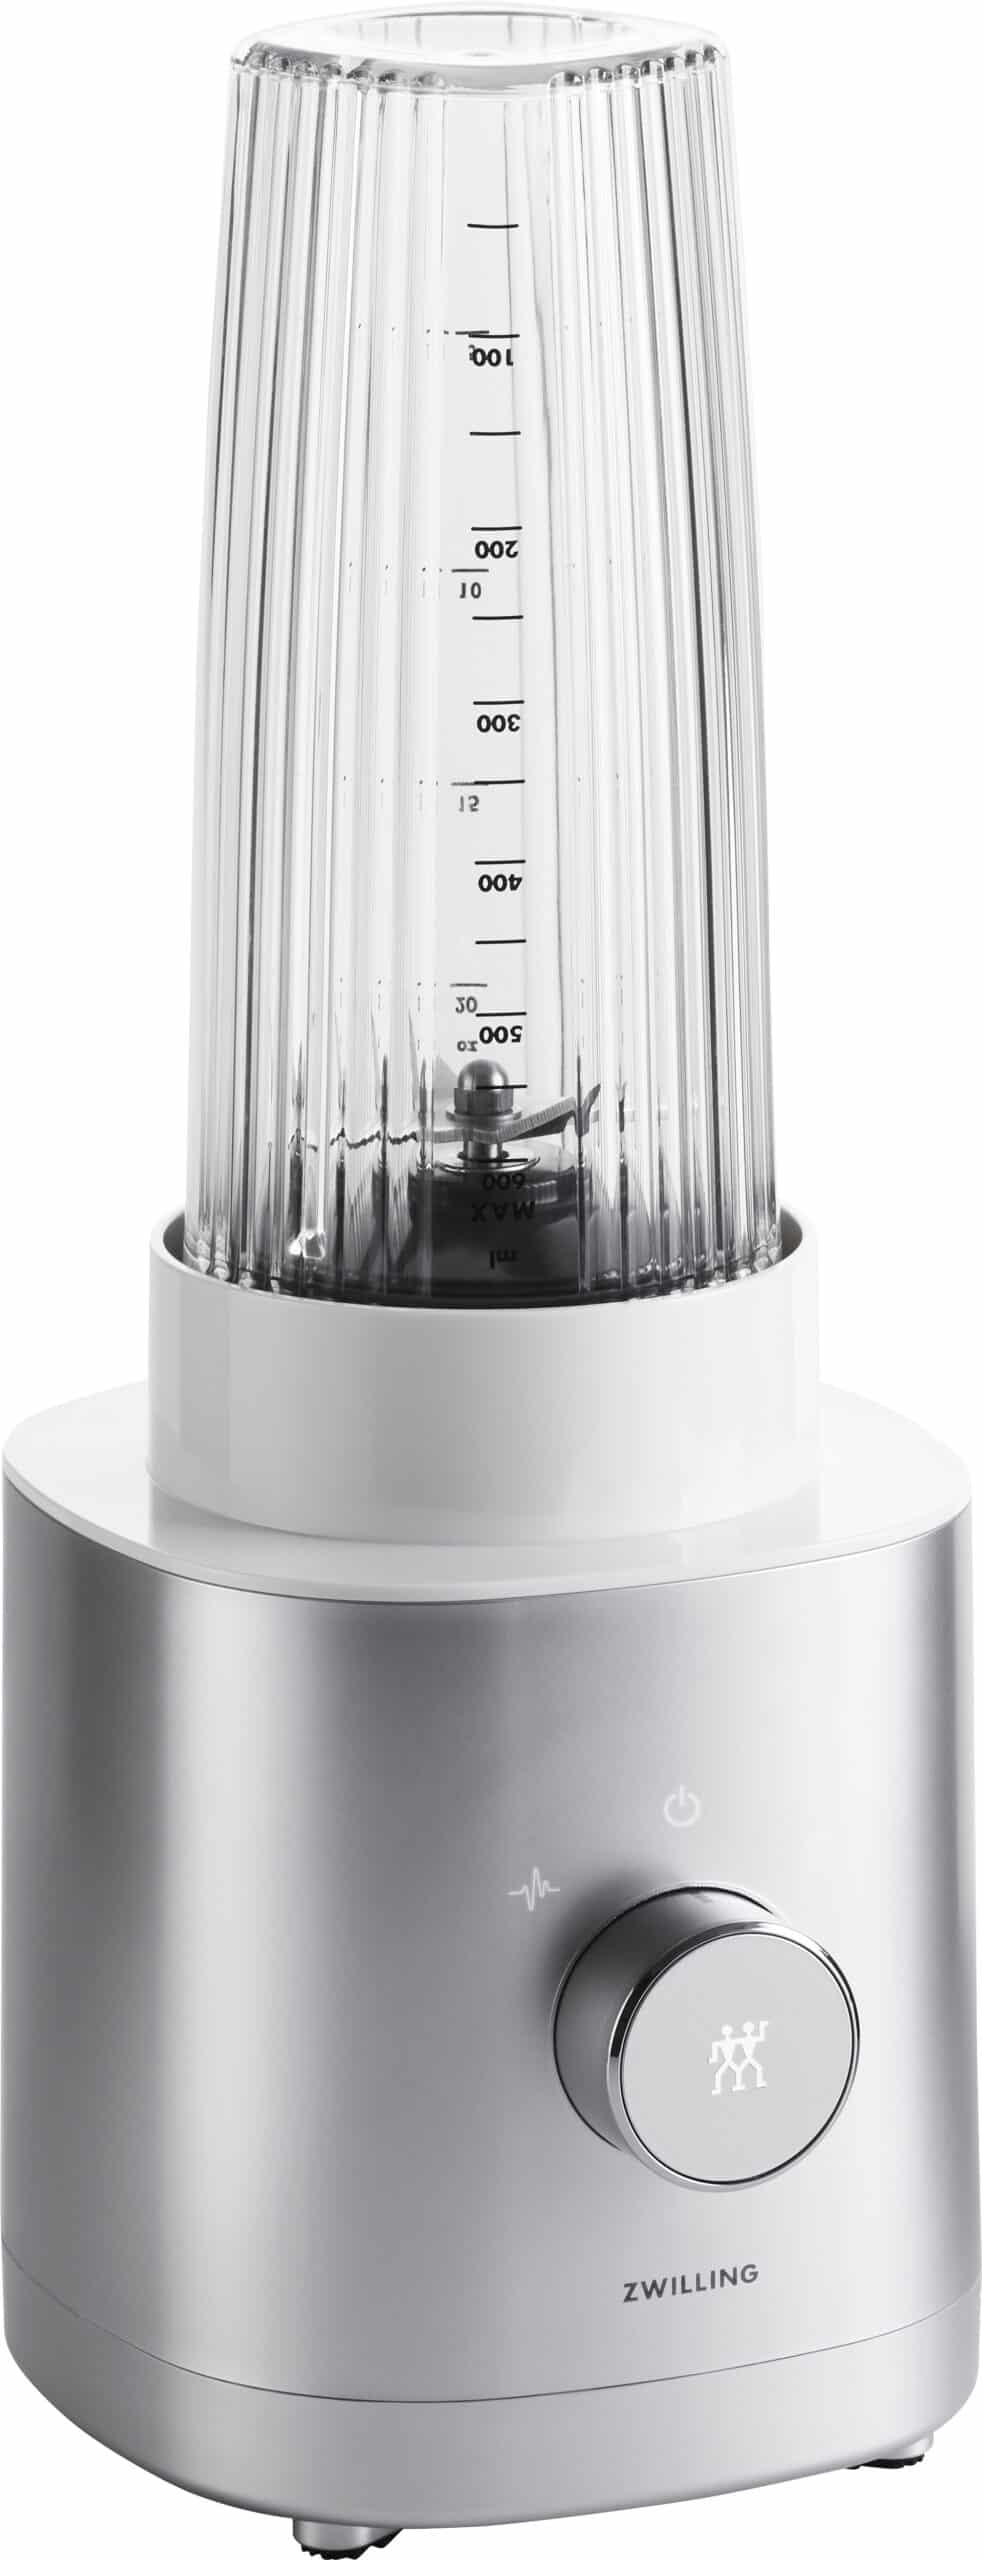 Zwilling Personal Blender Silver